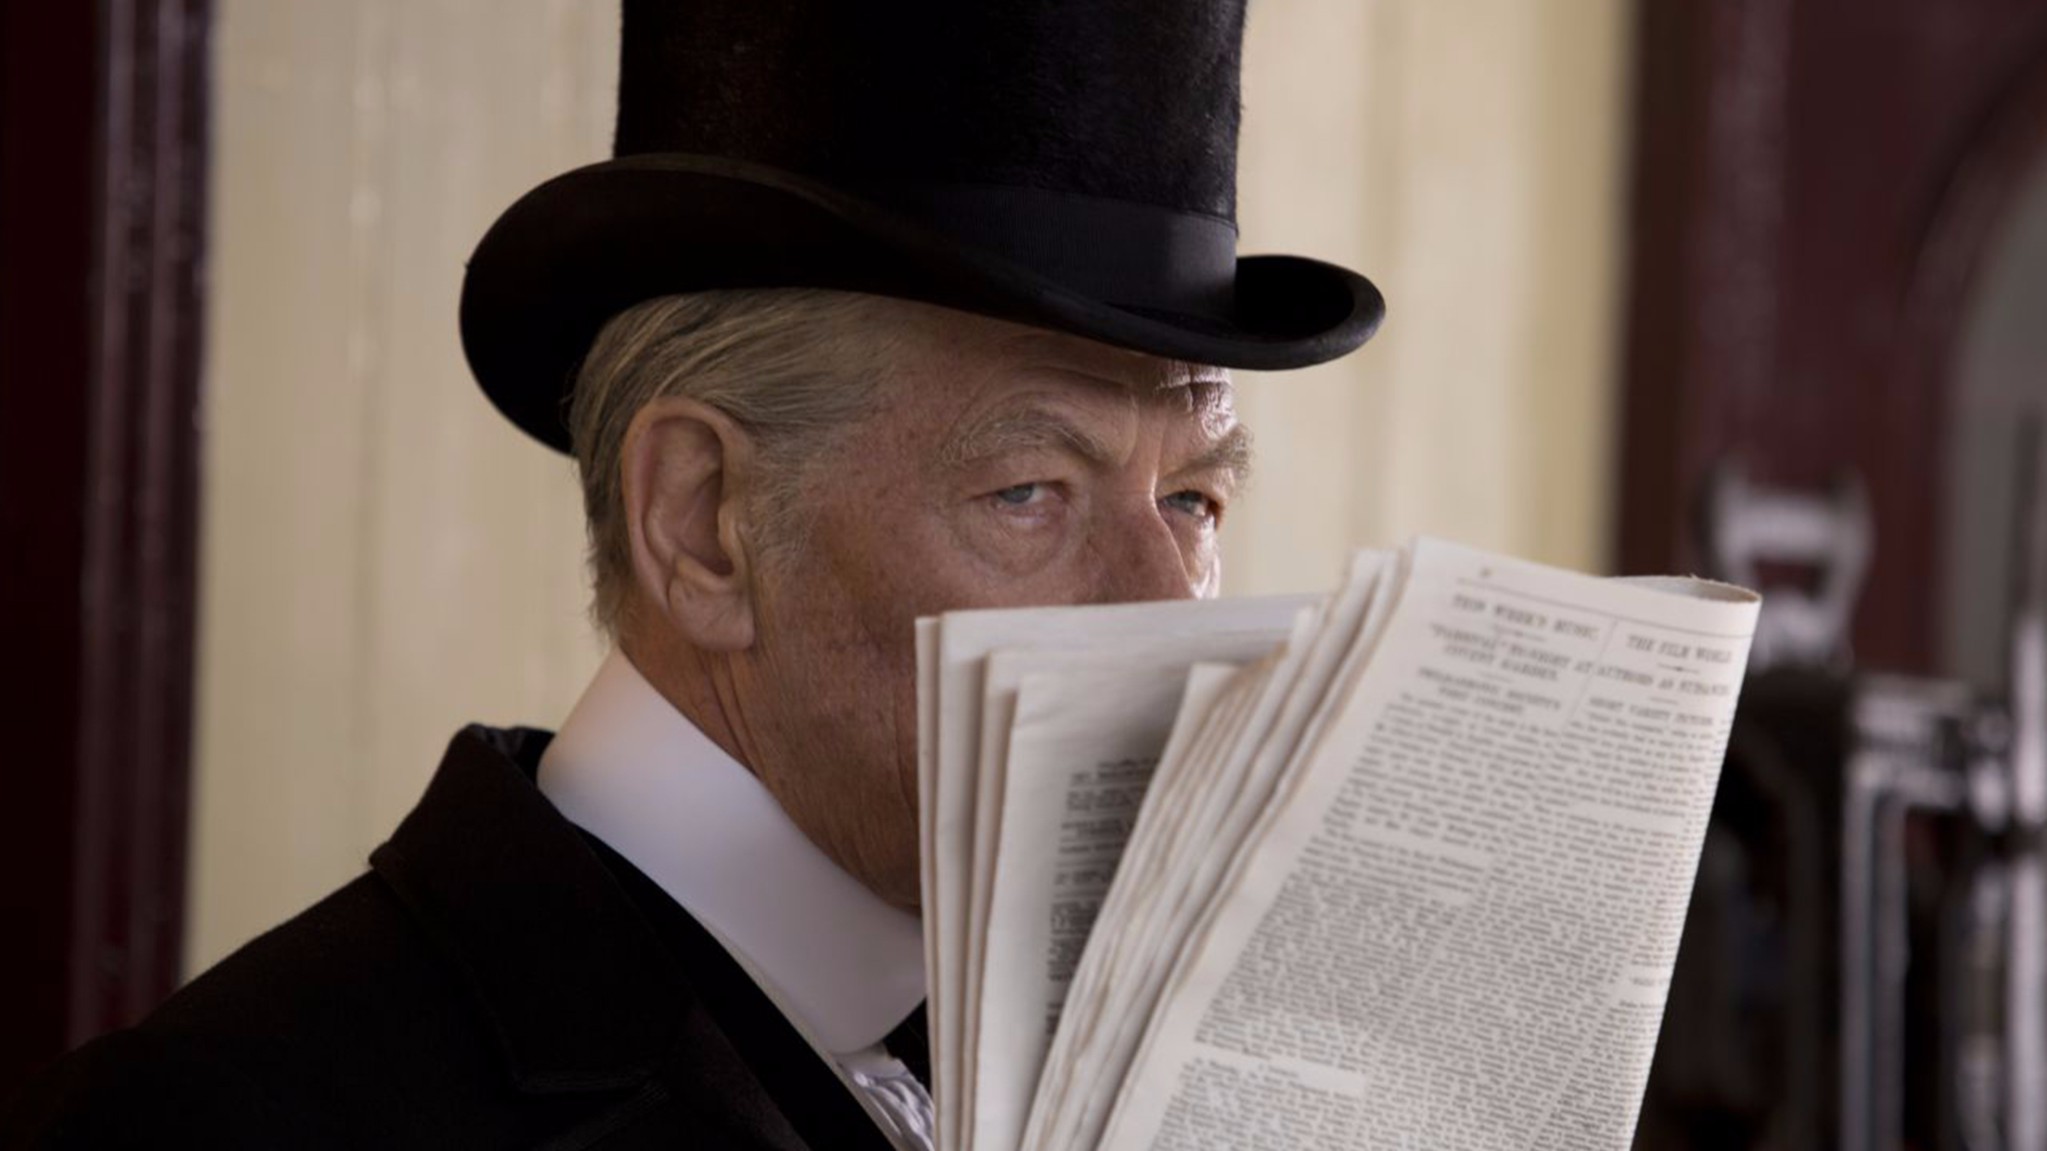 ‘MR. HOLMES’ HOLDS TO THE MAXIM THAT THERE IS NOTHING NEW UNDER THE SUN